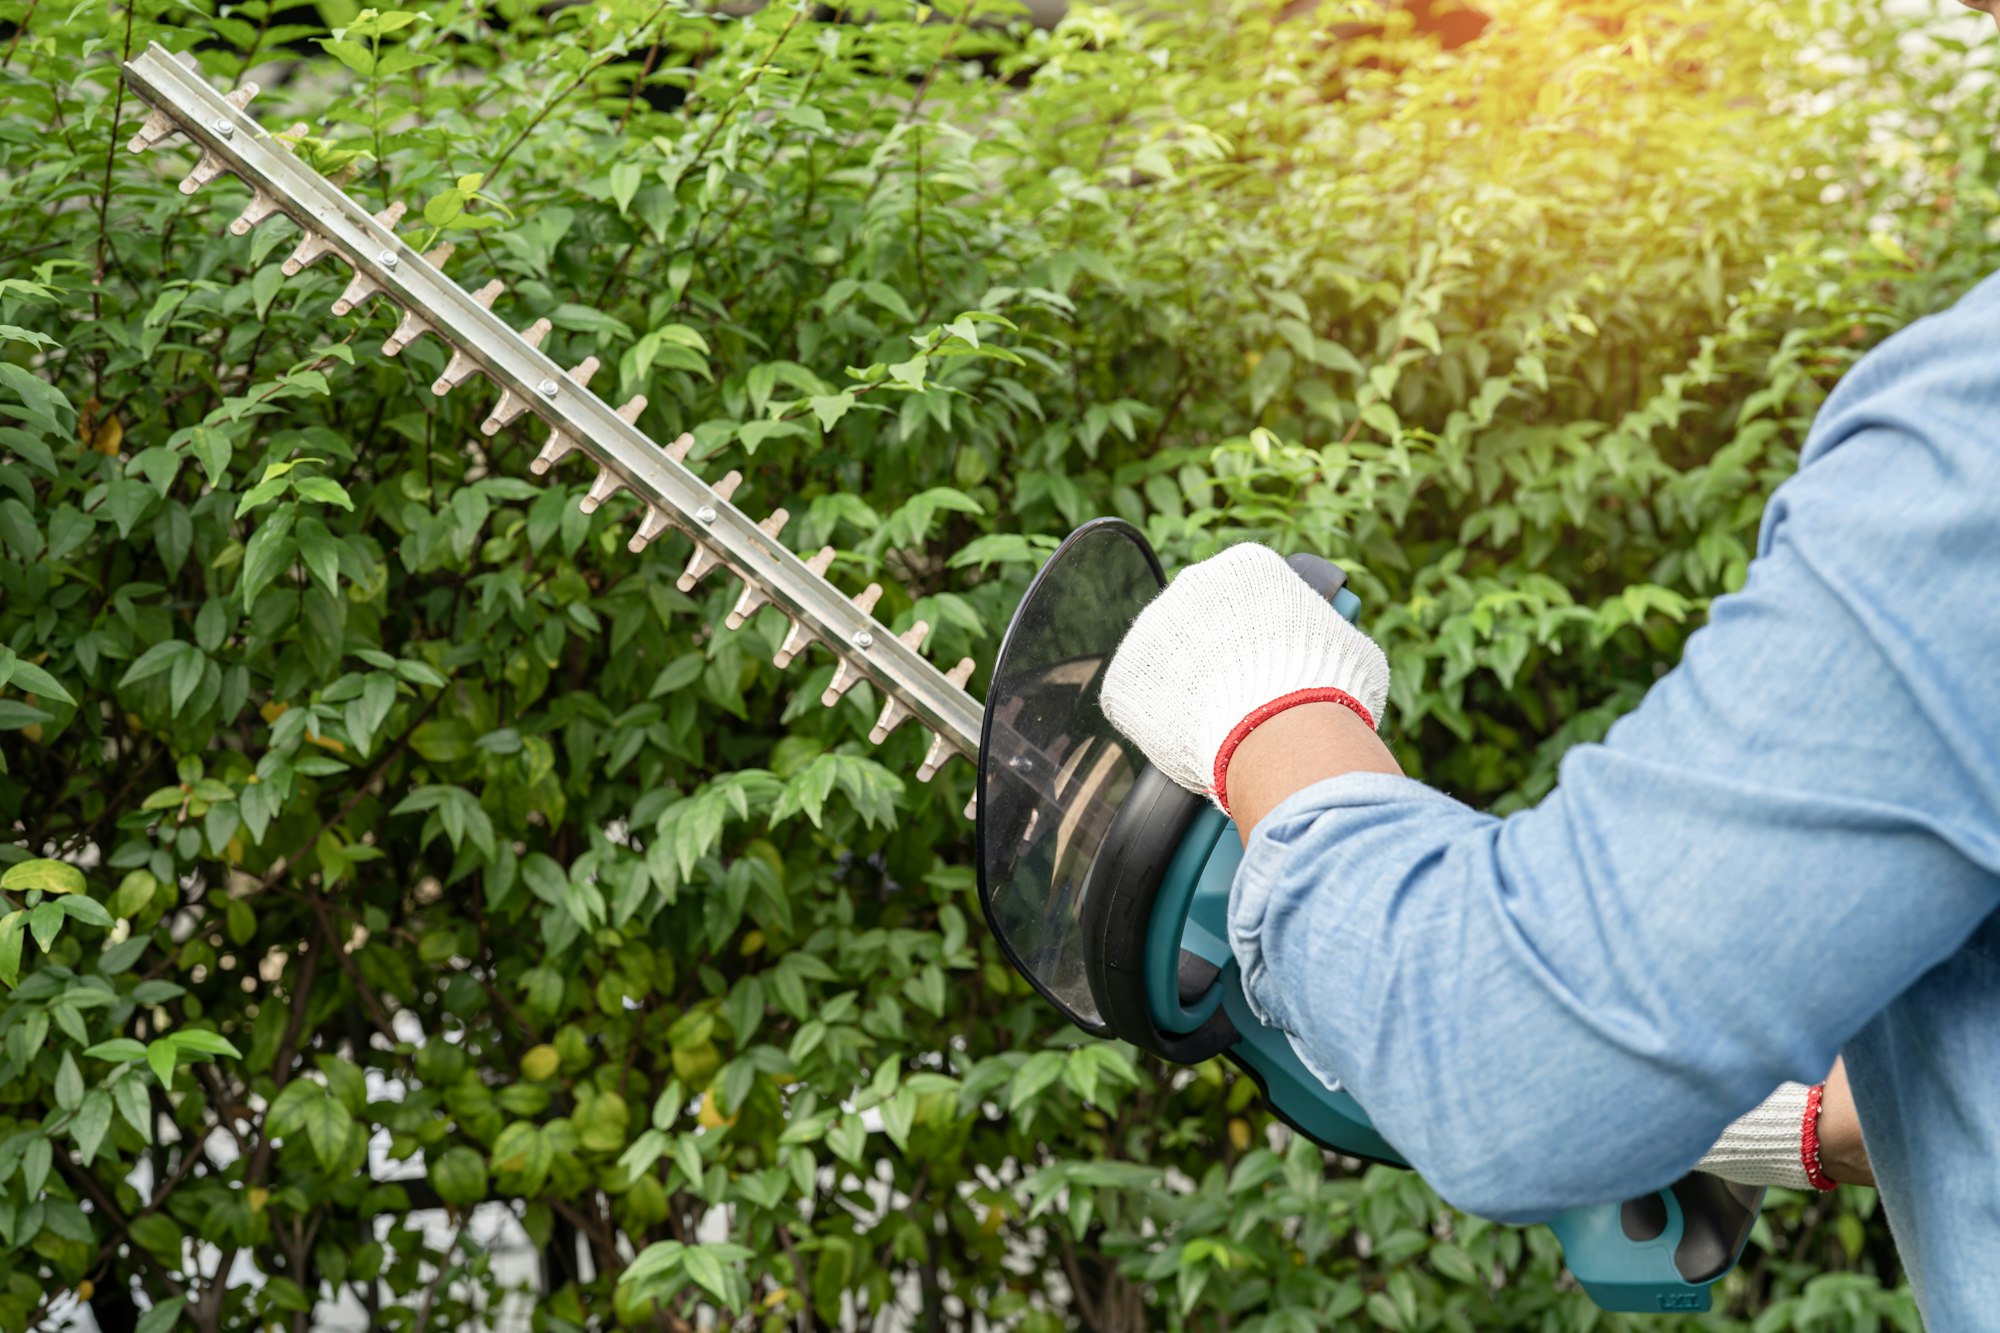 Gardener holding electric hedge trimmer to cut the treetop in garden.